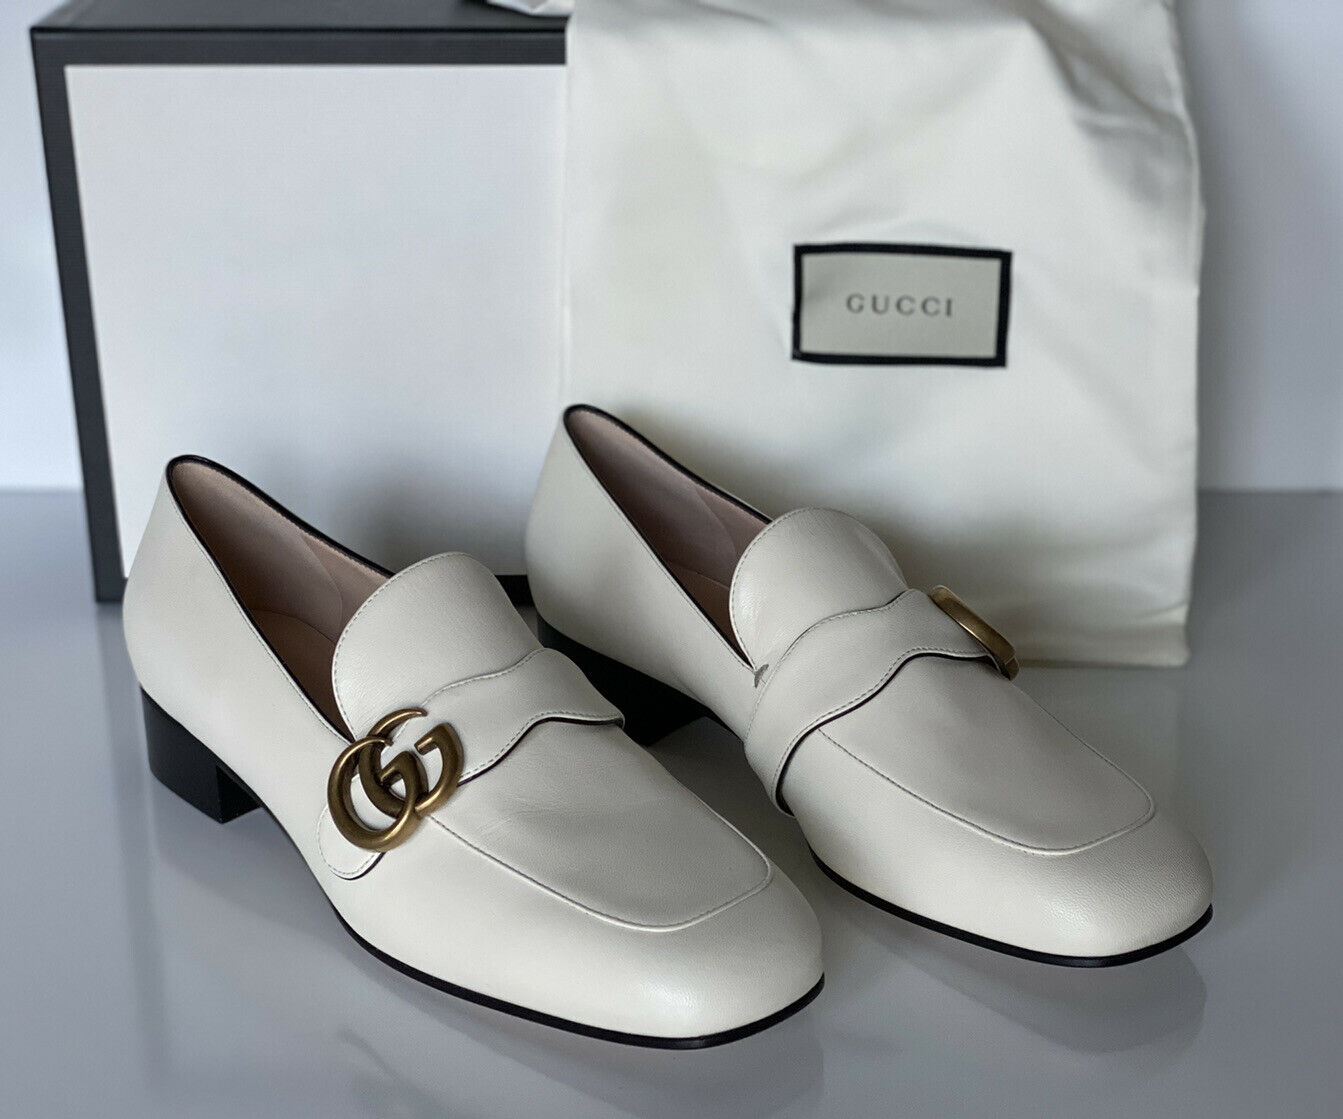 NIB Gucci Marmont Leather Mystic White Shoes 9 US (39 Euro) 602496 Italy